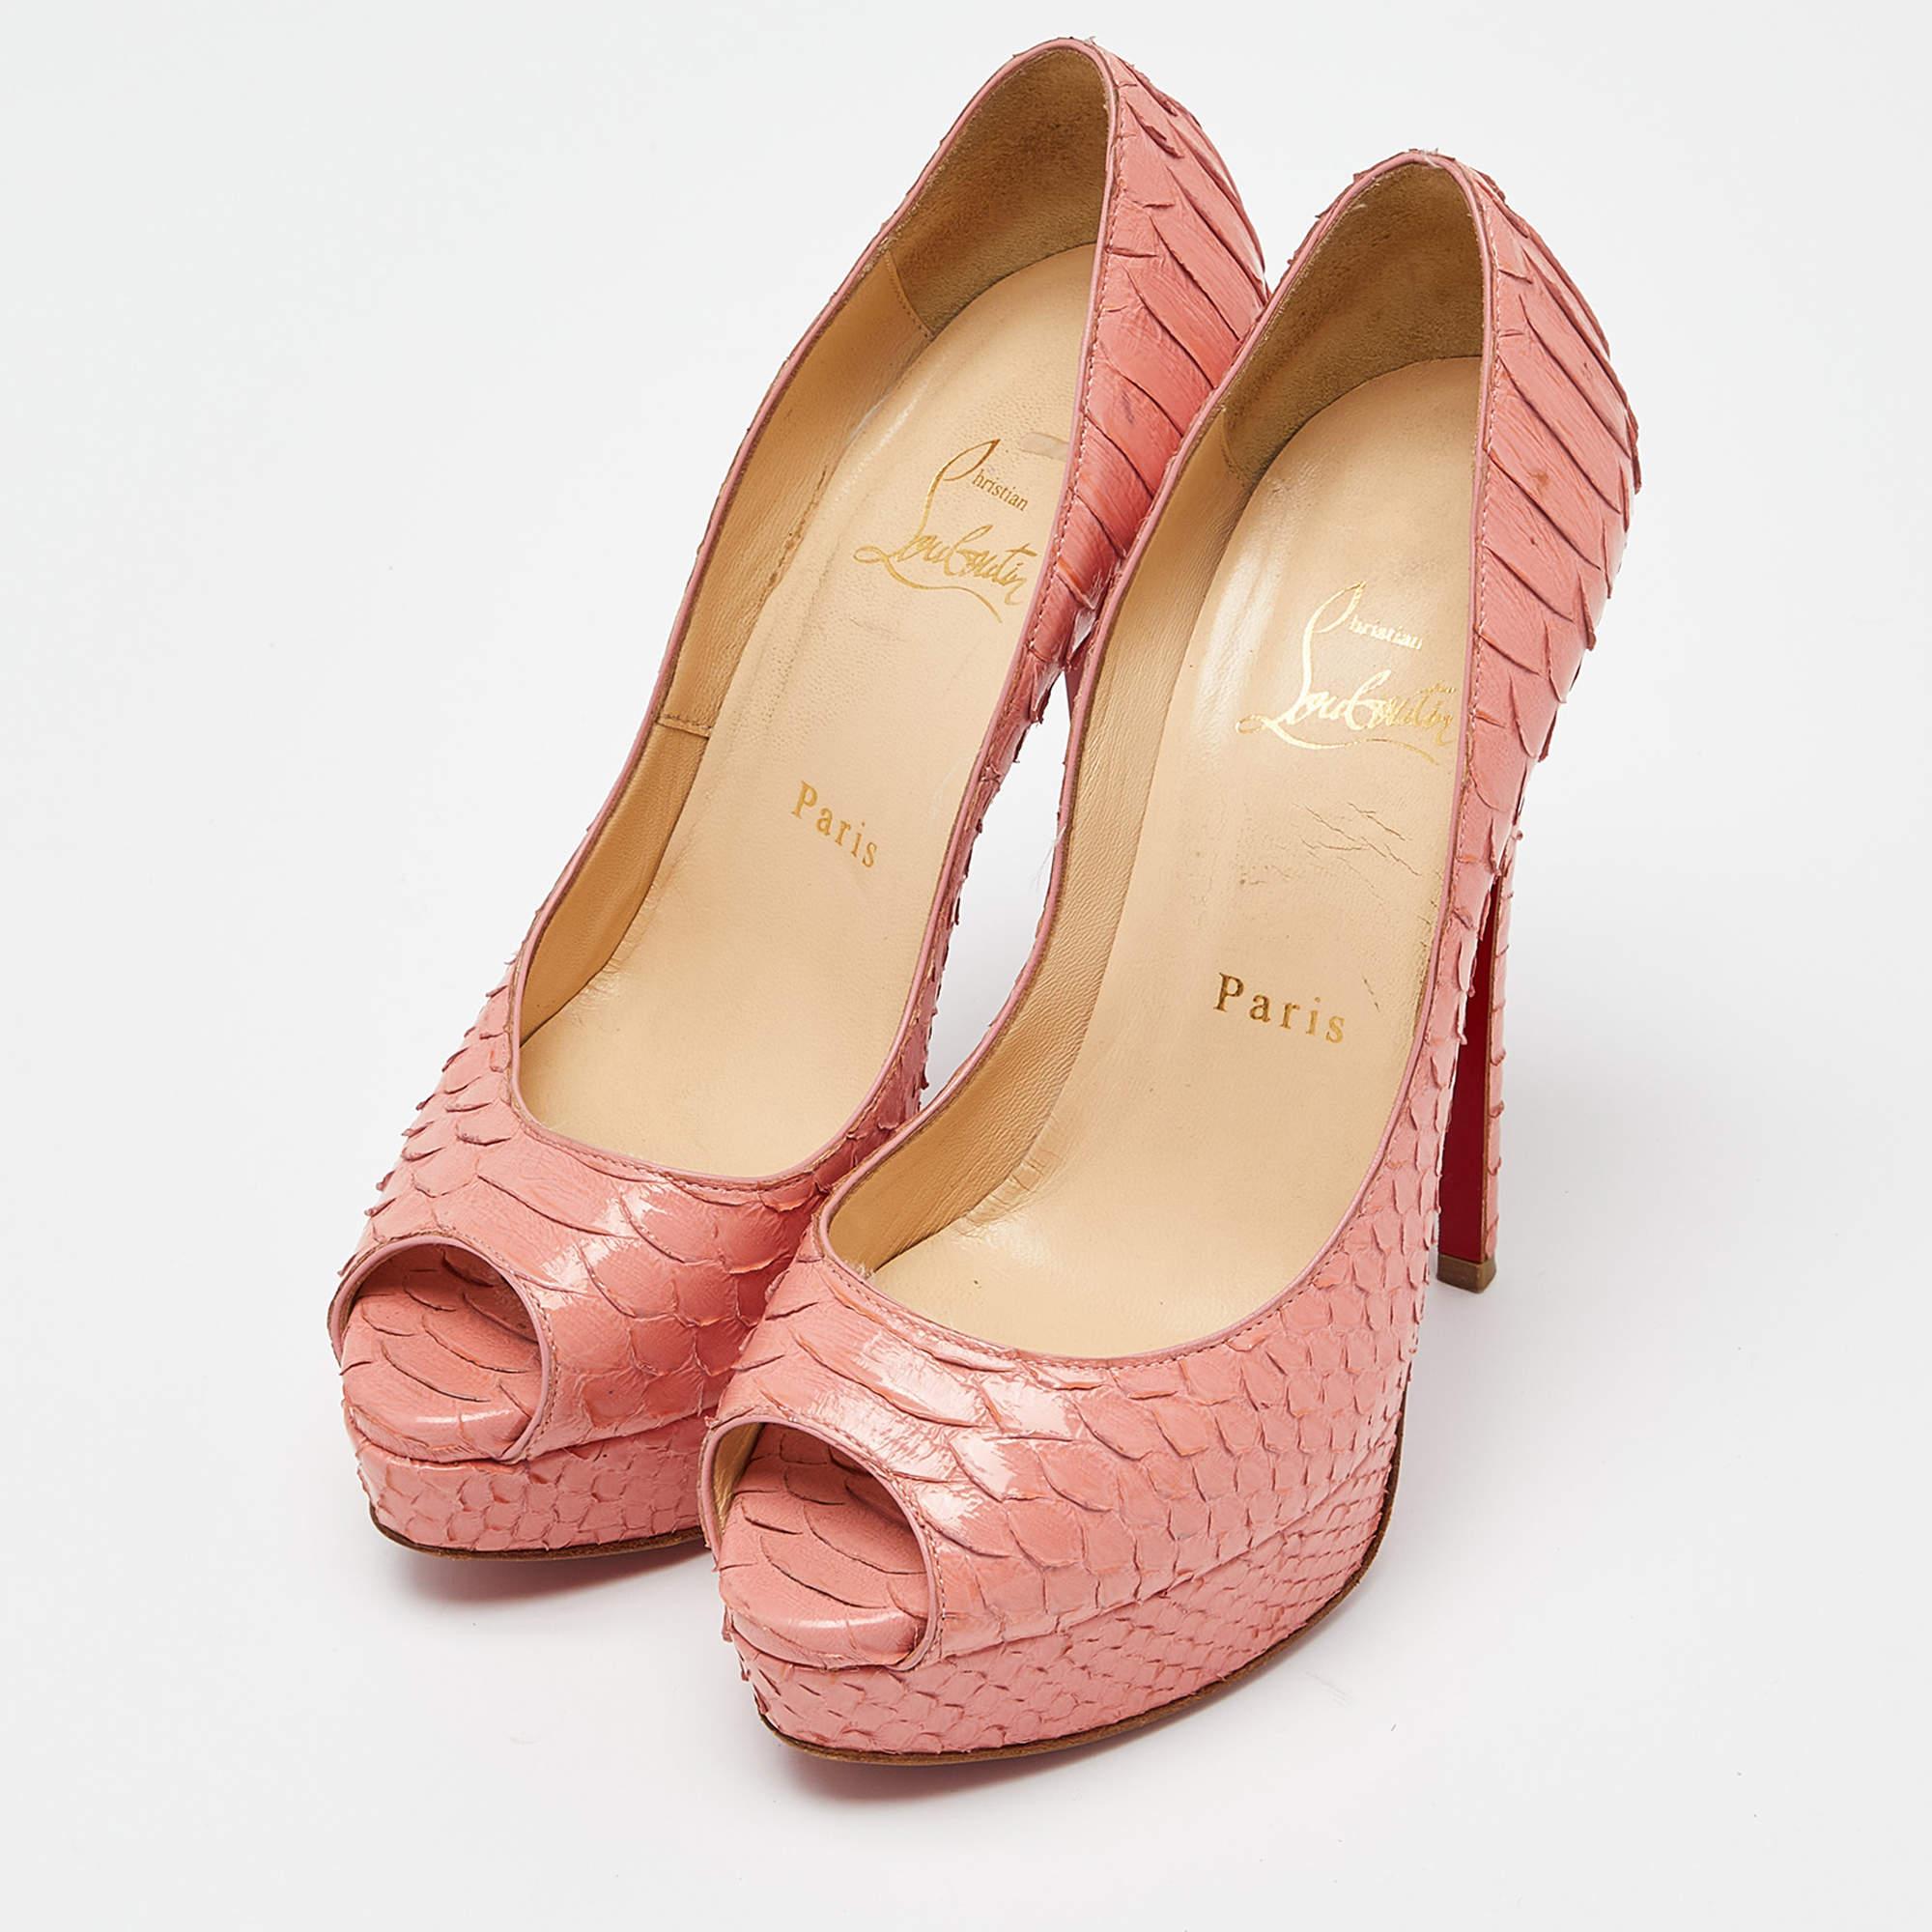 Exhibit an elegant style with this pair of pumps. These Christian Louboutin shoes for women are crafted from quality materials. They are set on durable soles and sleek heels.

